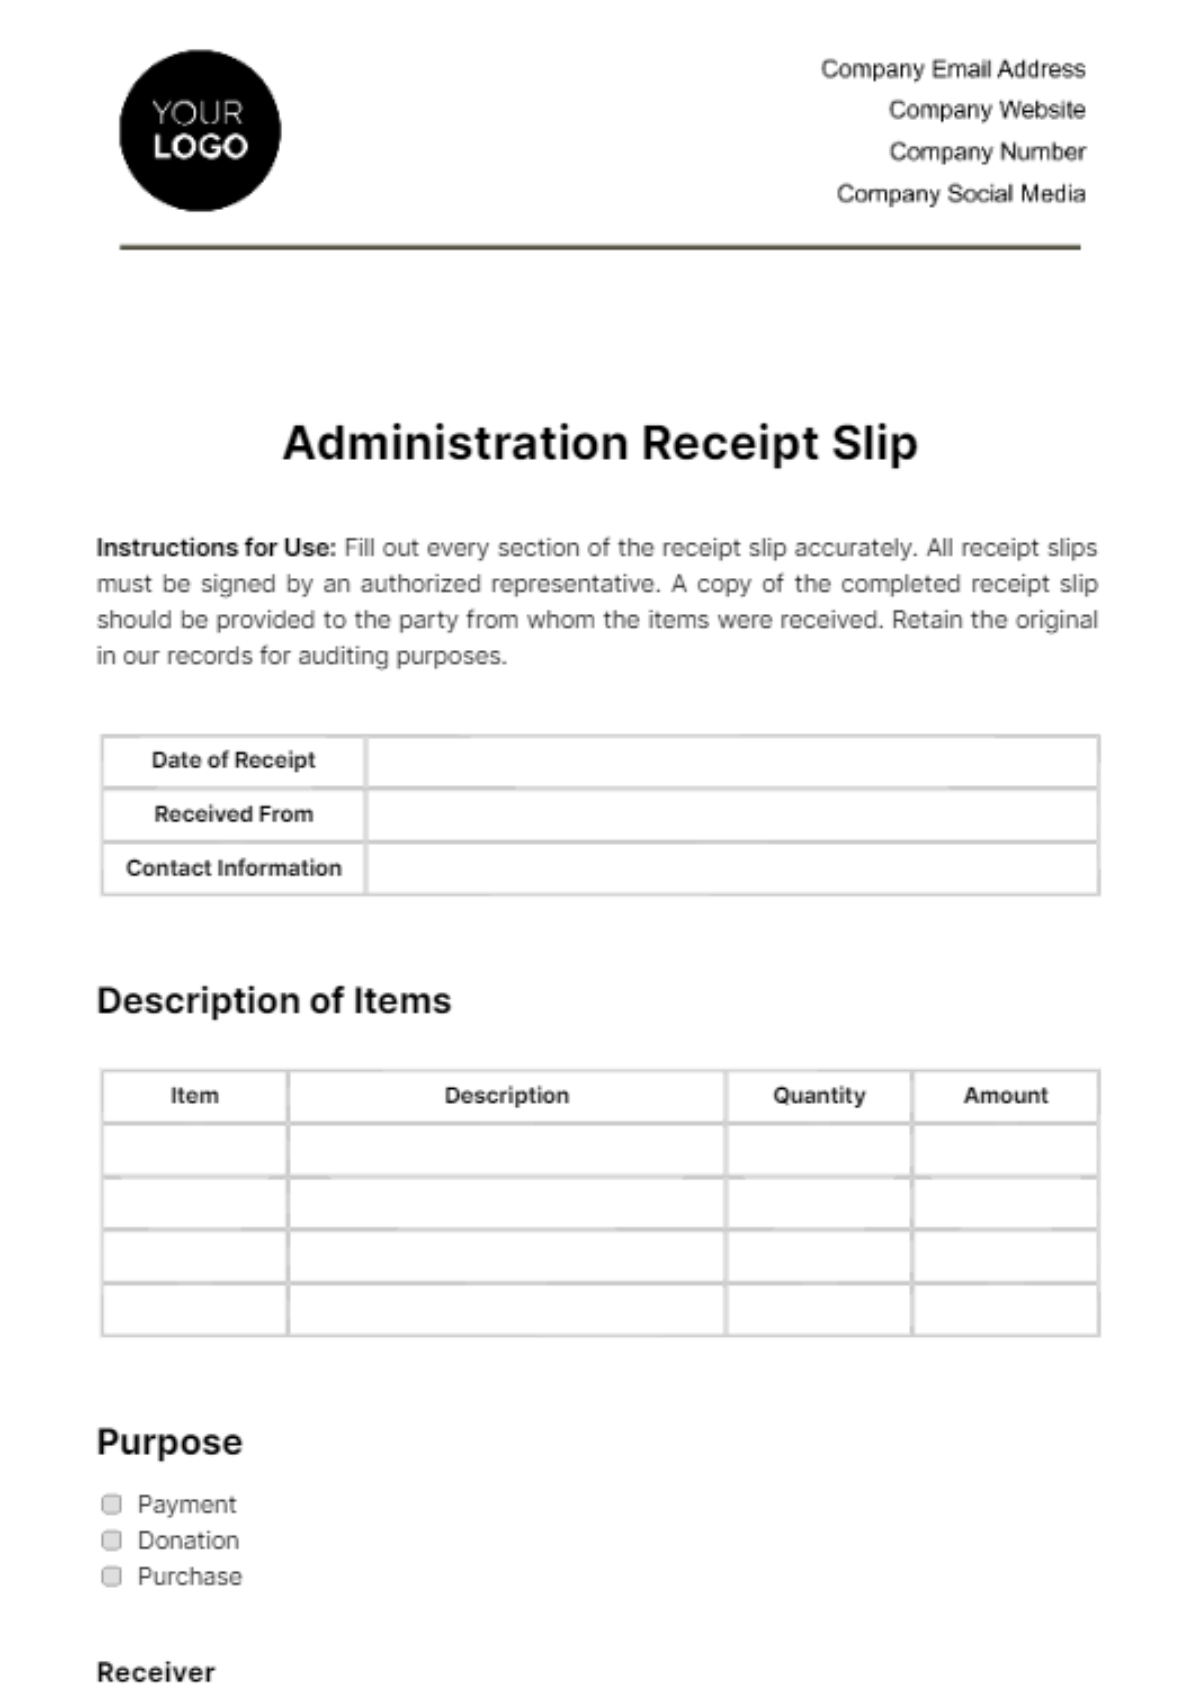 Free Administration Receipt Slip Template